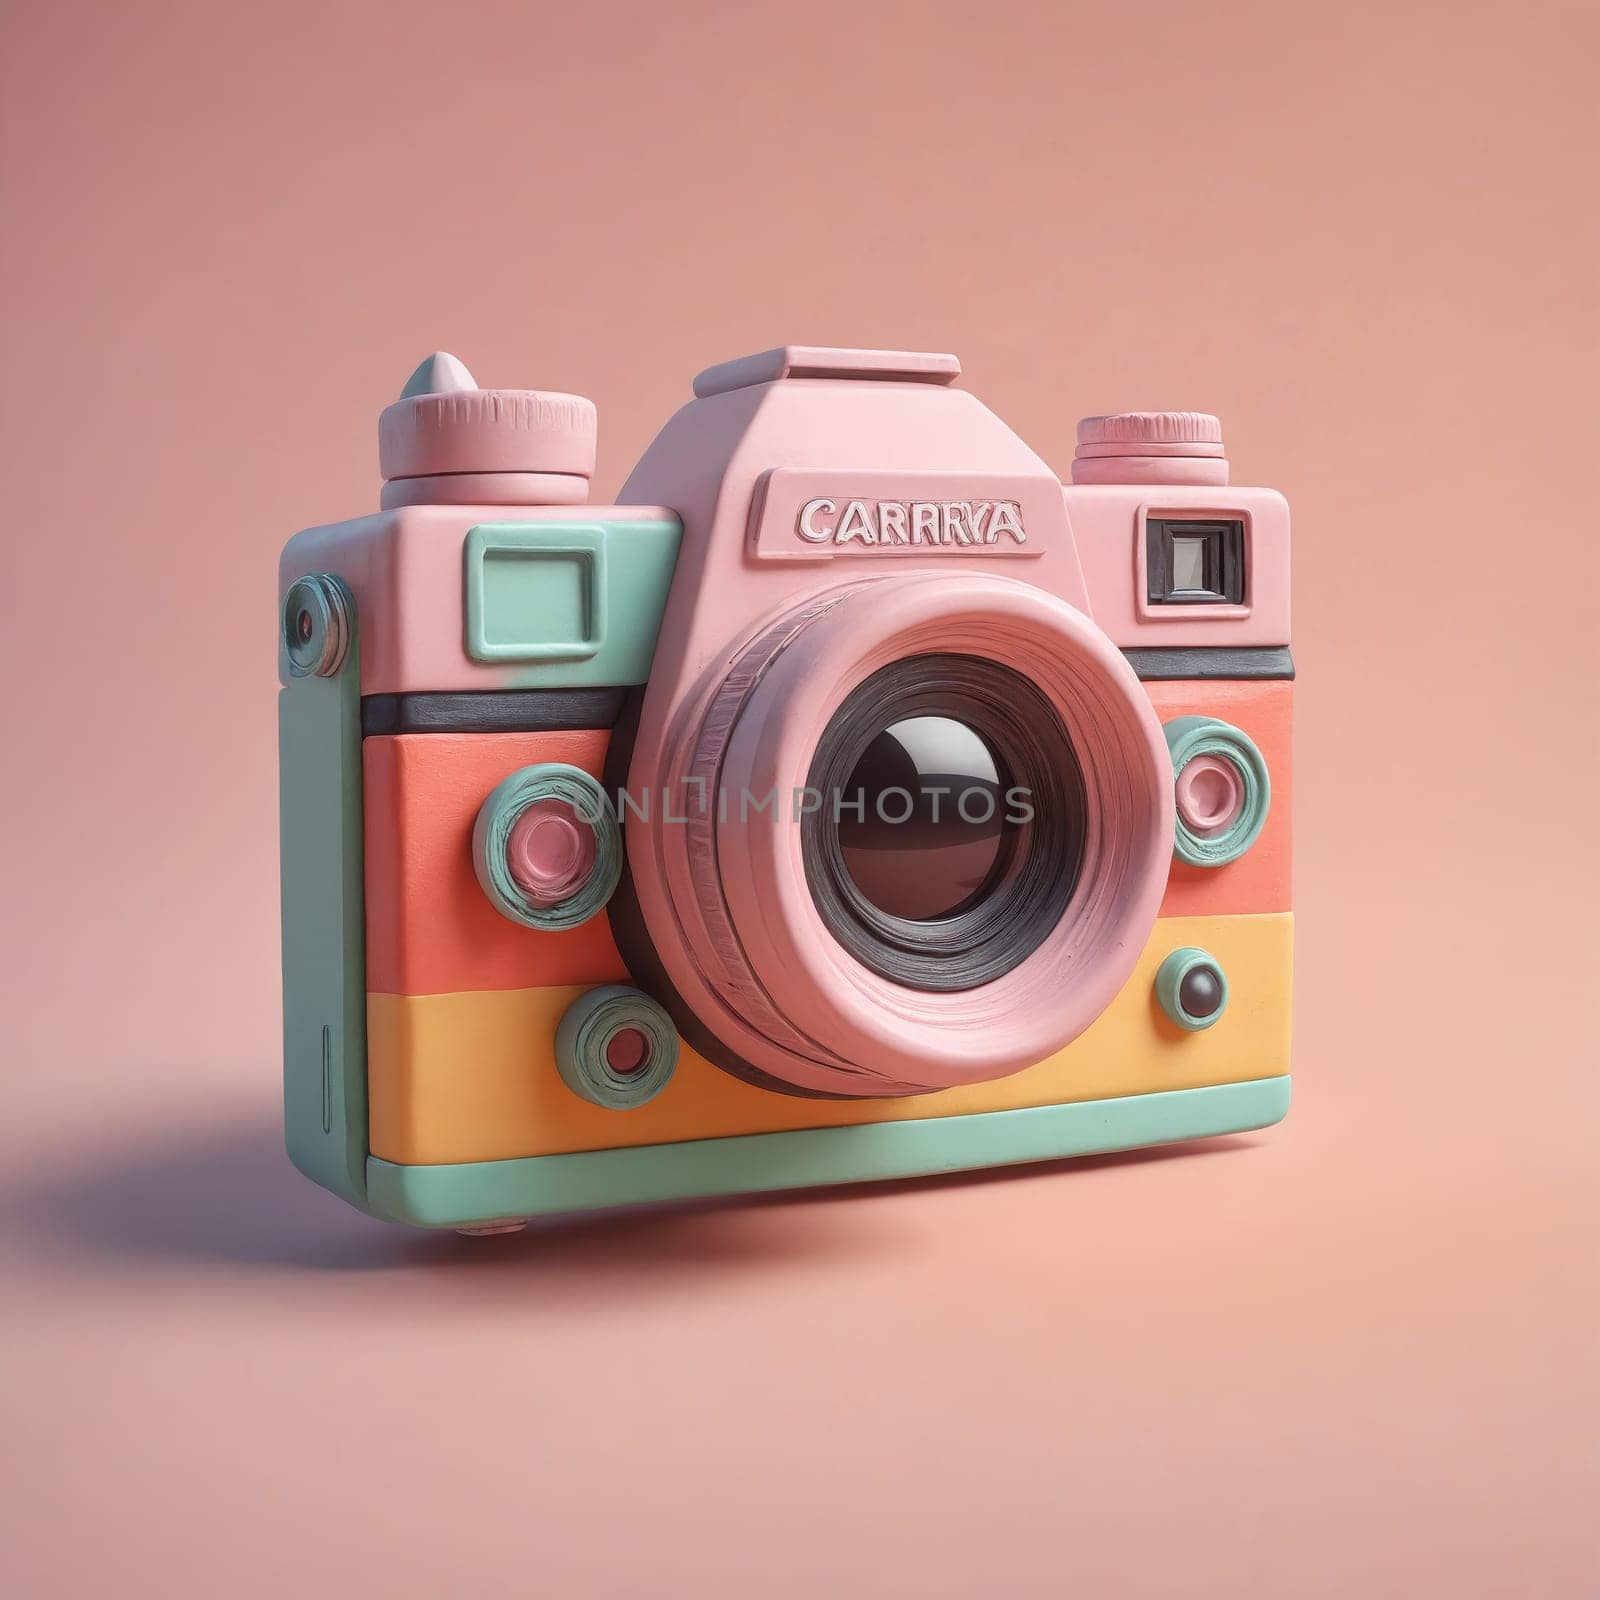 A digital camera with a pink and green design, featuring a purple lens, set against a pink background. This camera accessory is compact and perfect for pointandshoot photography